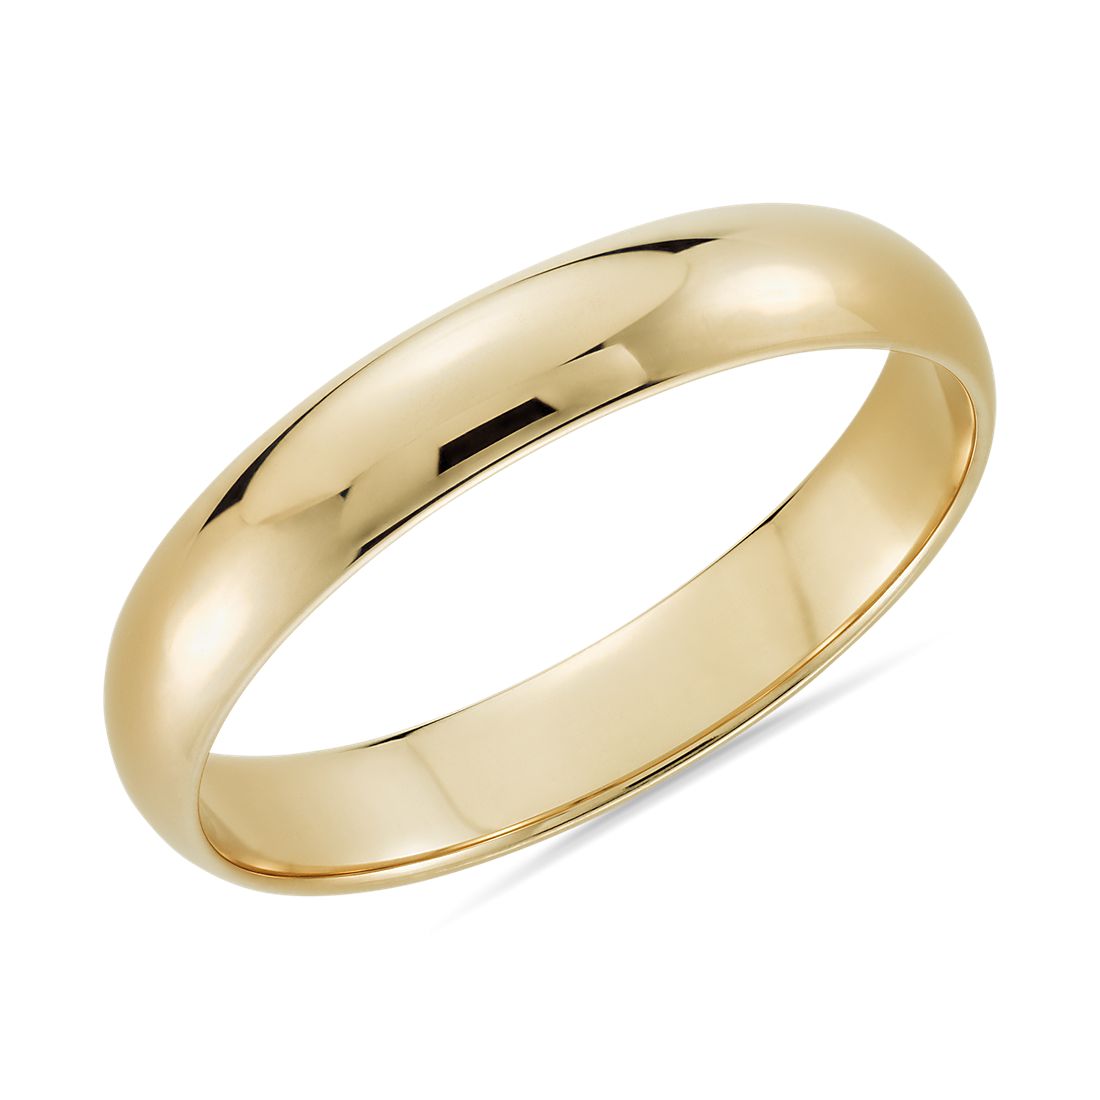 Awesome 14k Yellow Gold Plated 3 mm D Shape Simple High Polish Classic Comfort Fit Engagement Wedding Band Ring 